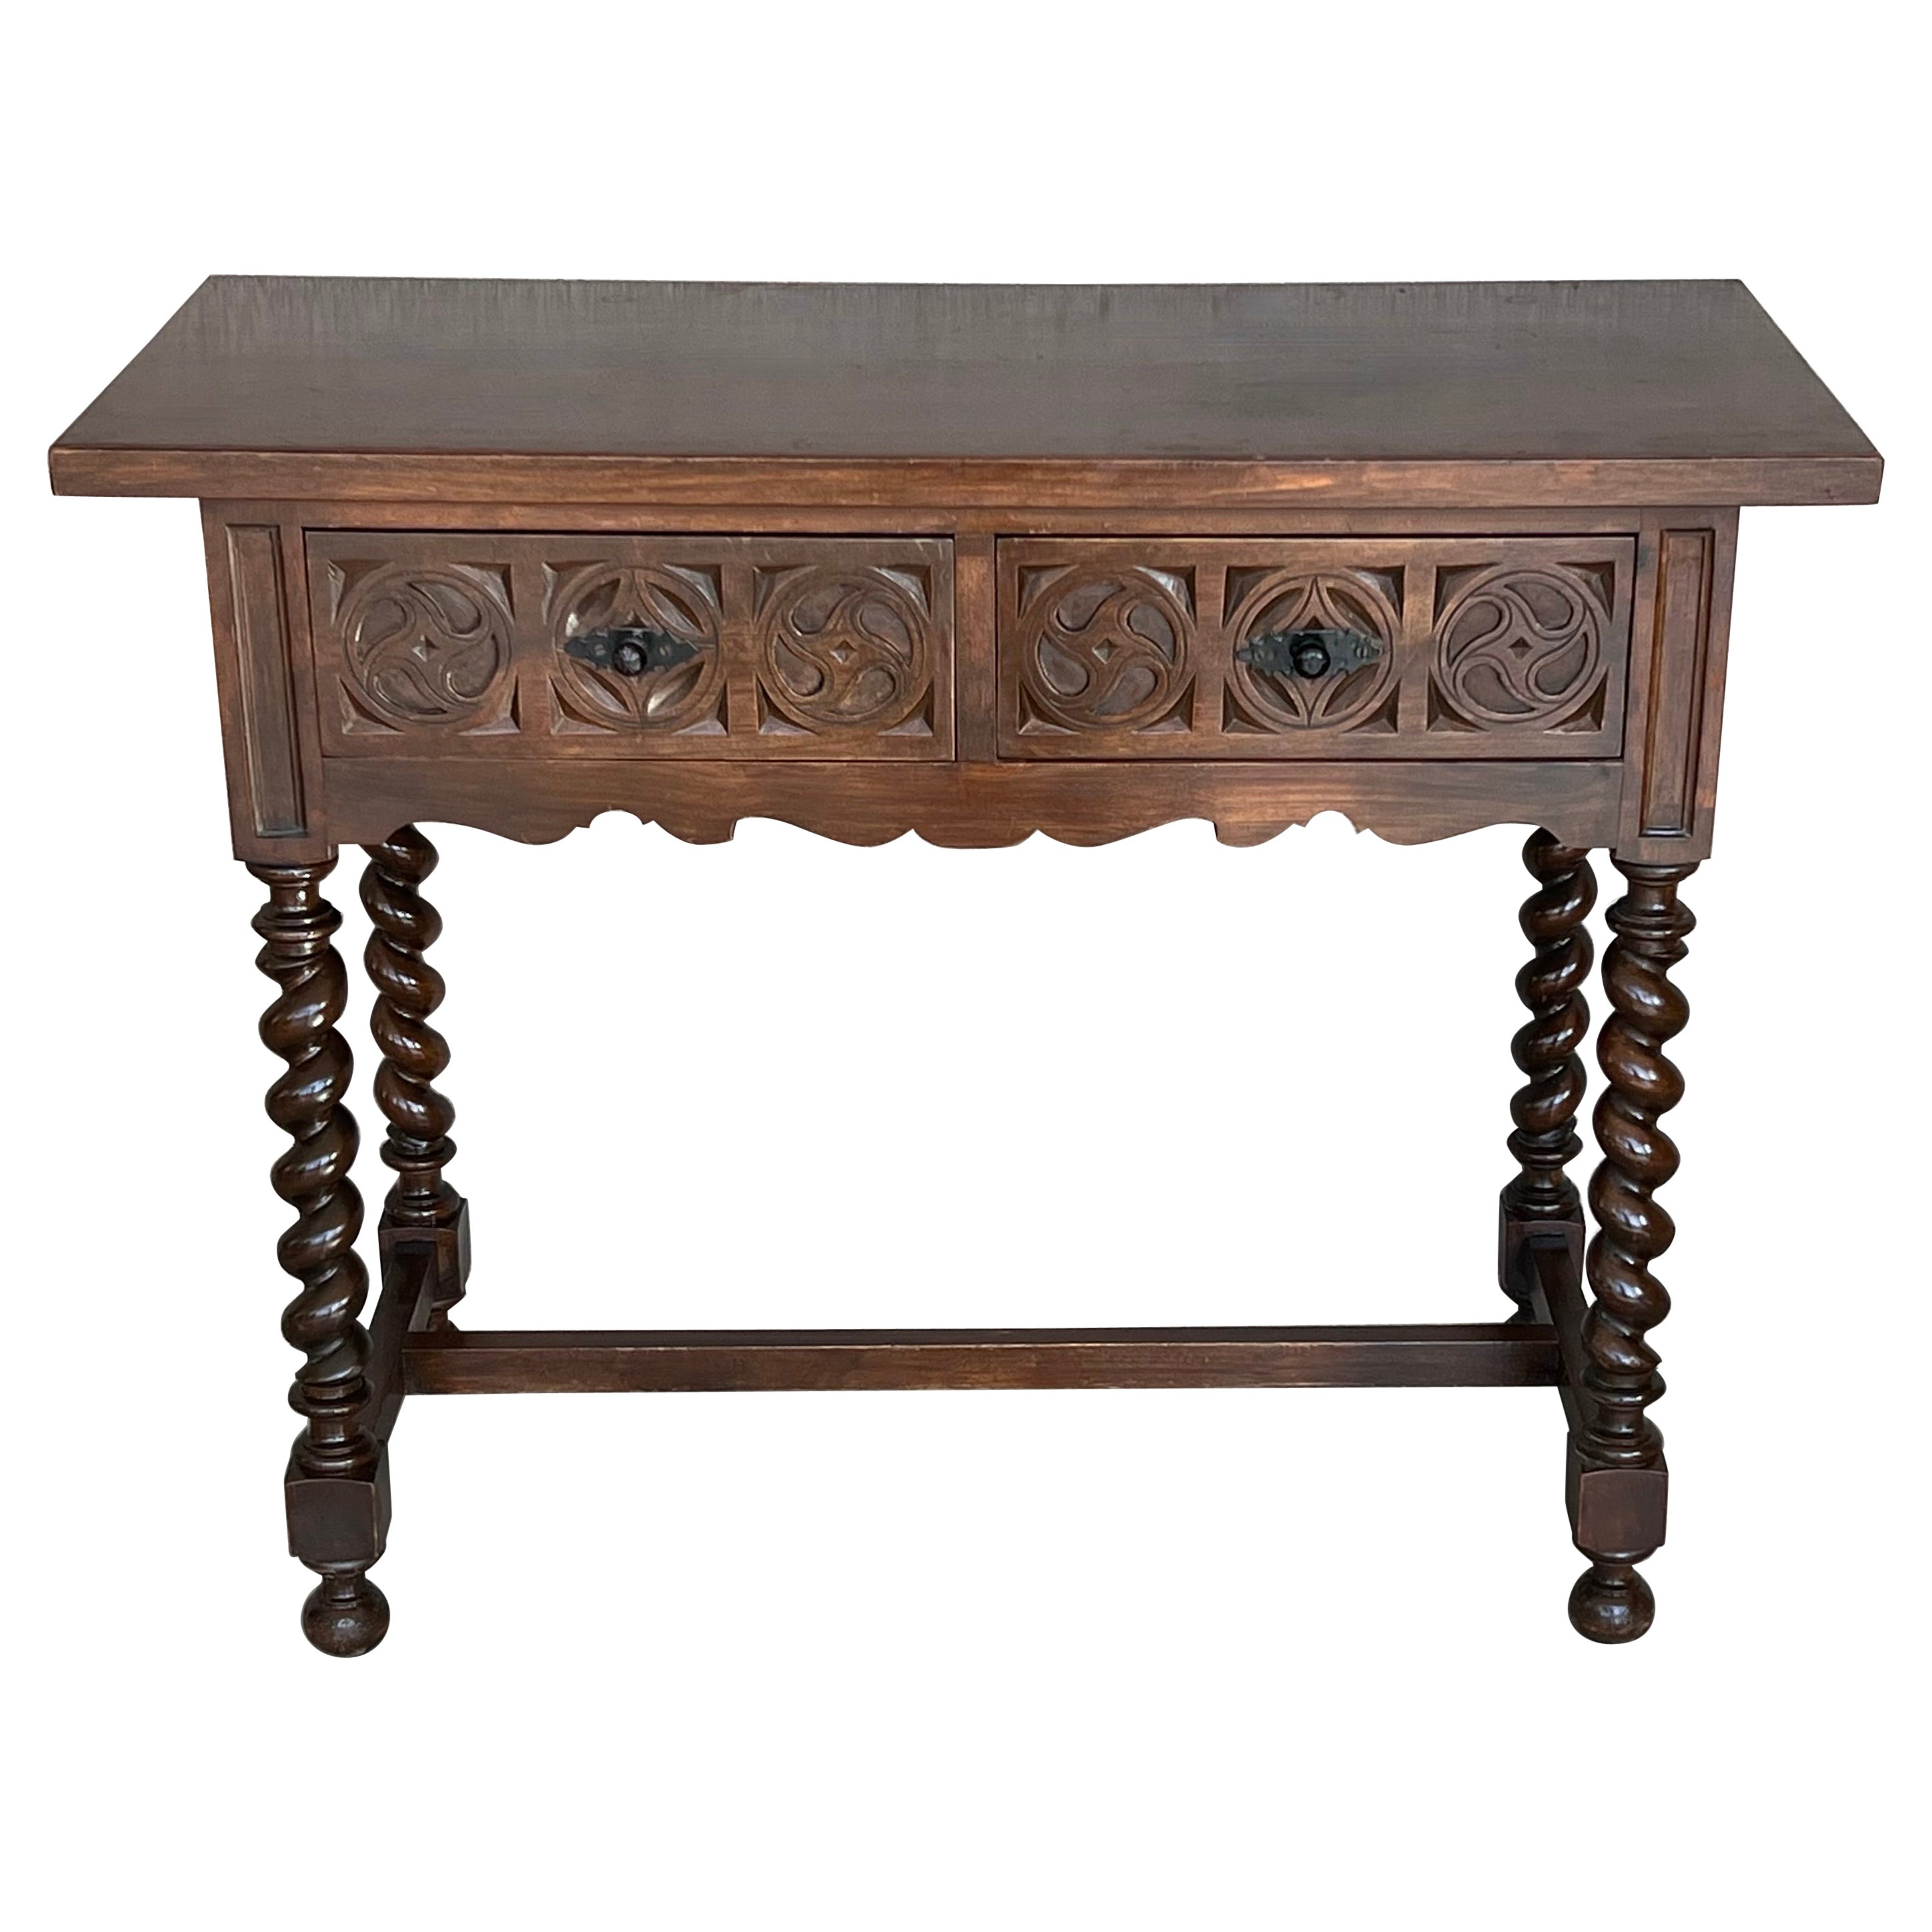 Early 20th Century Spanish Carved Console Table with Turned Legs